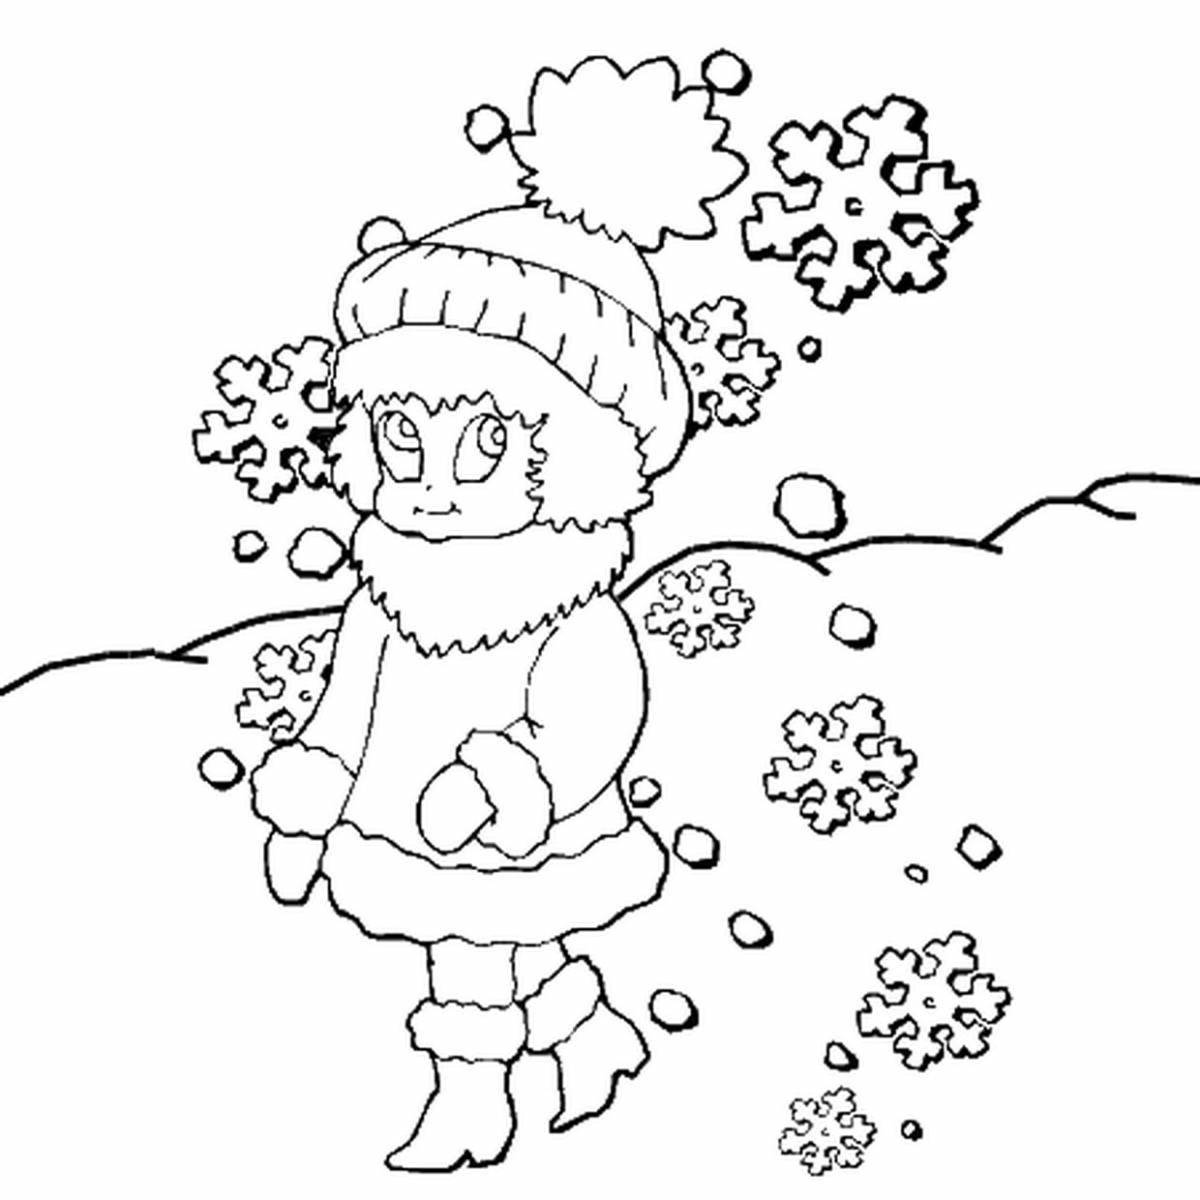 Scenic snowdrift coloring page